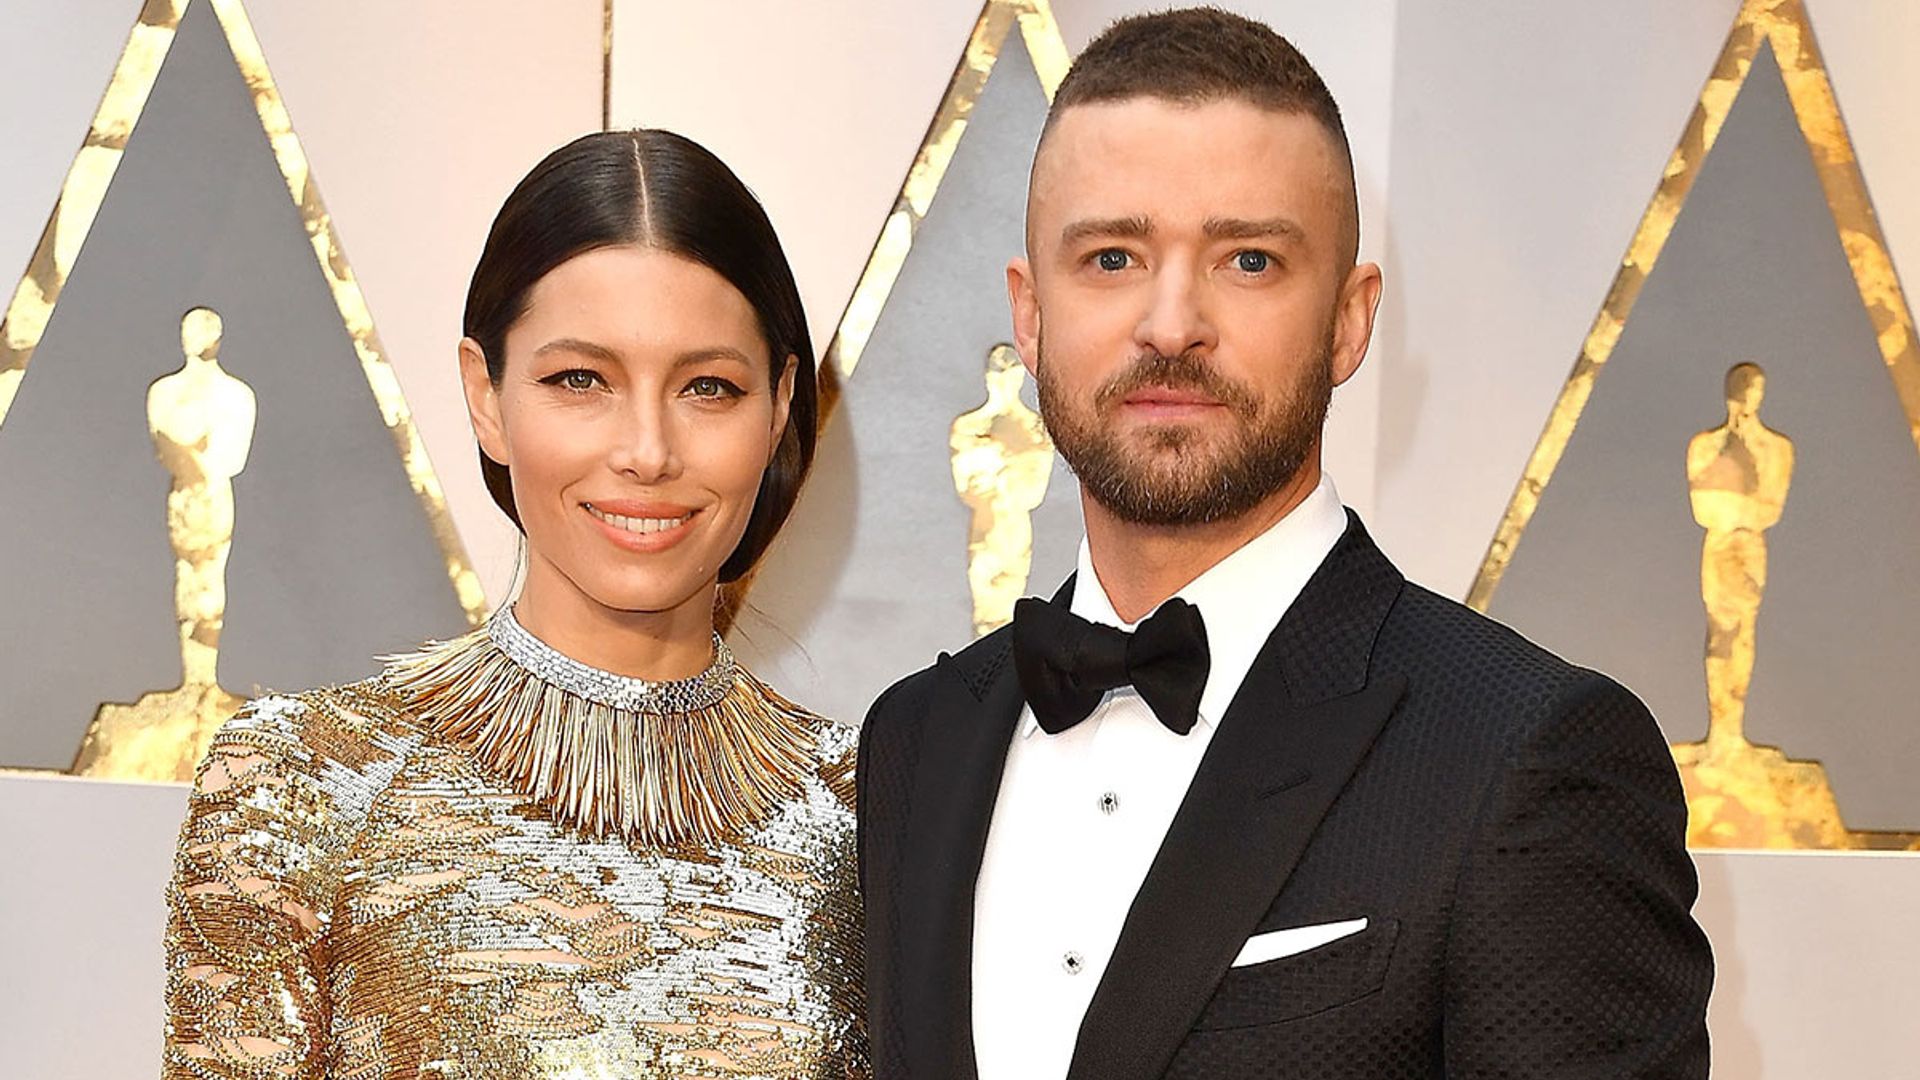 Justin Timberlake issues public apology to wife Jessica Biel after holding hands with co-star